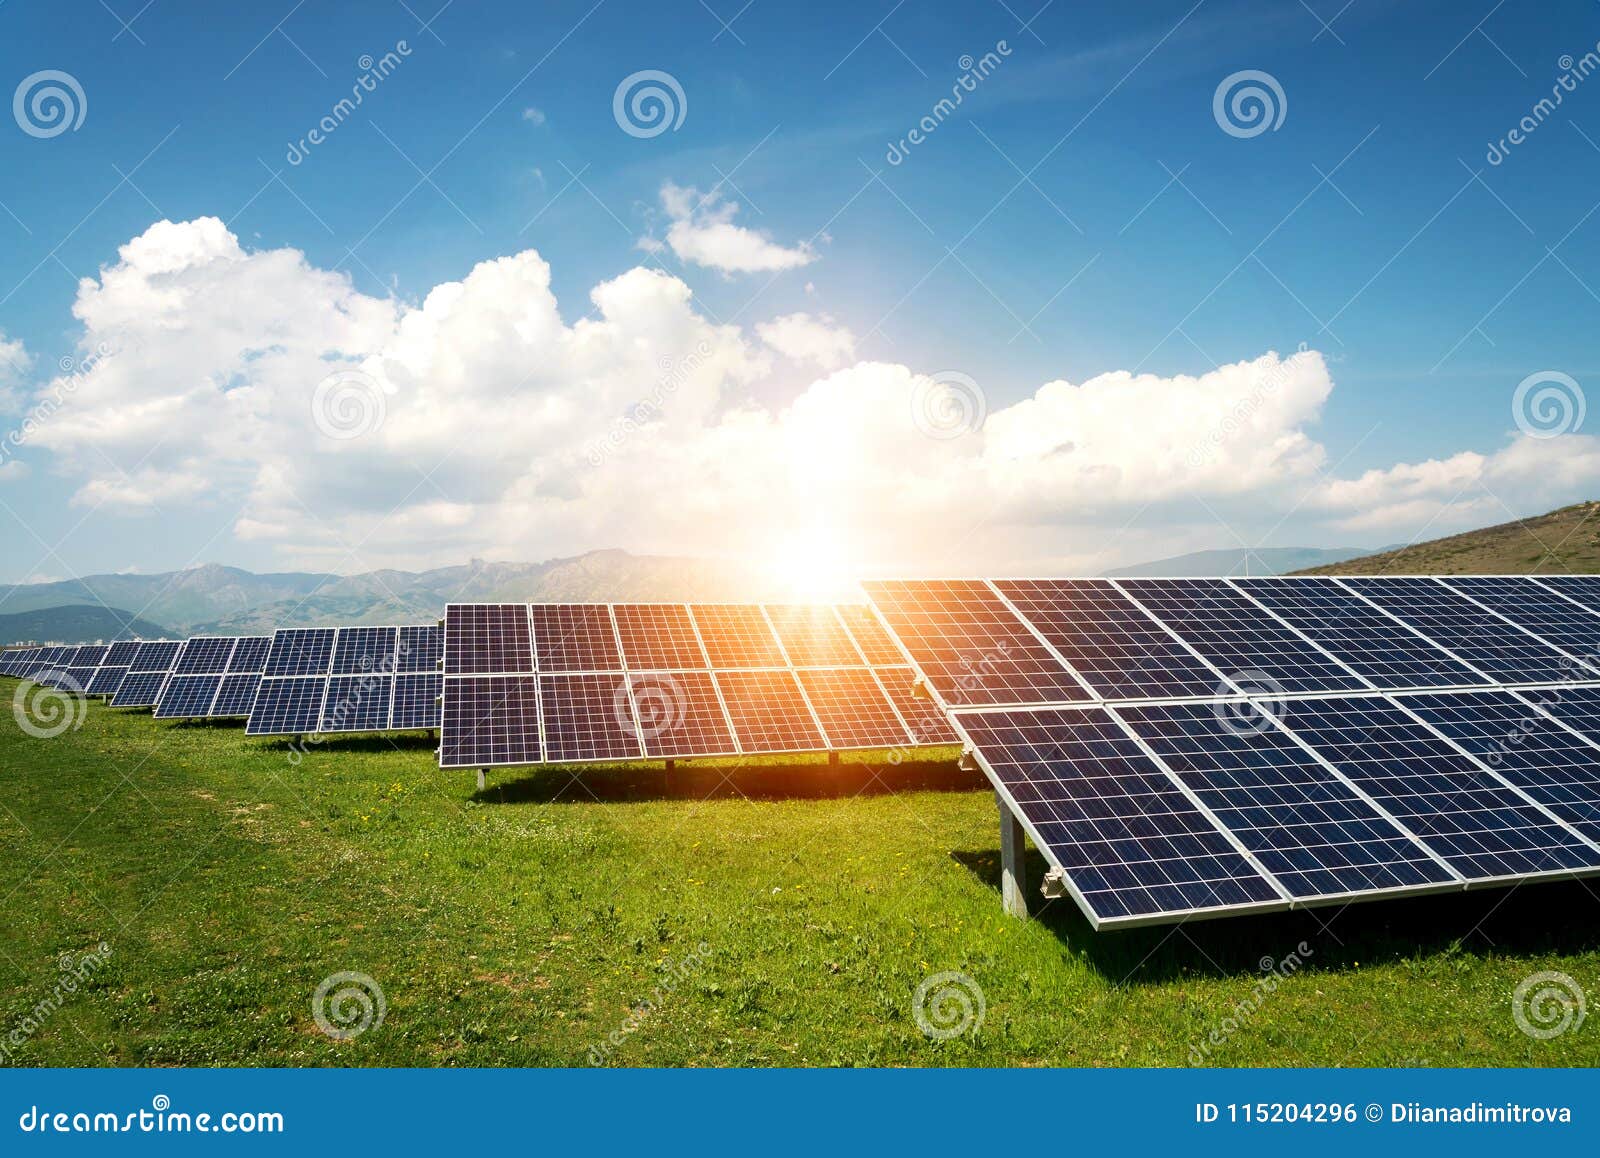 solar panel, photovoltaic, alternative electricity source - concept of sustainable resources